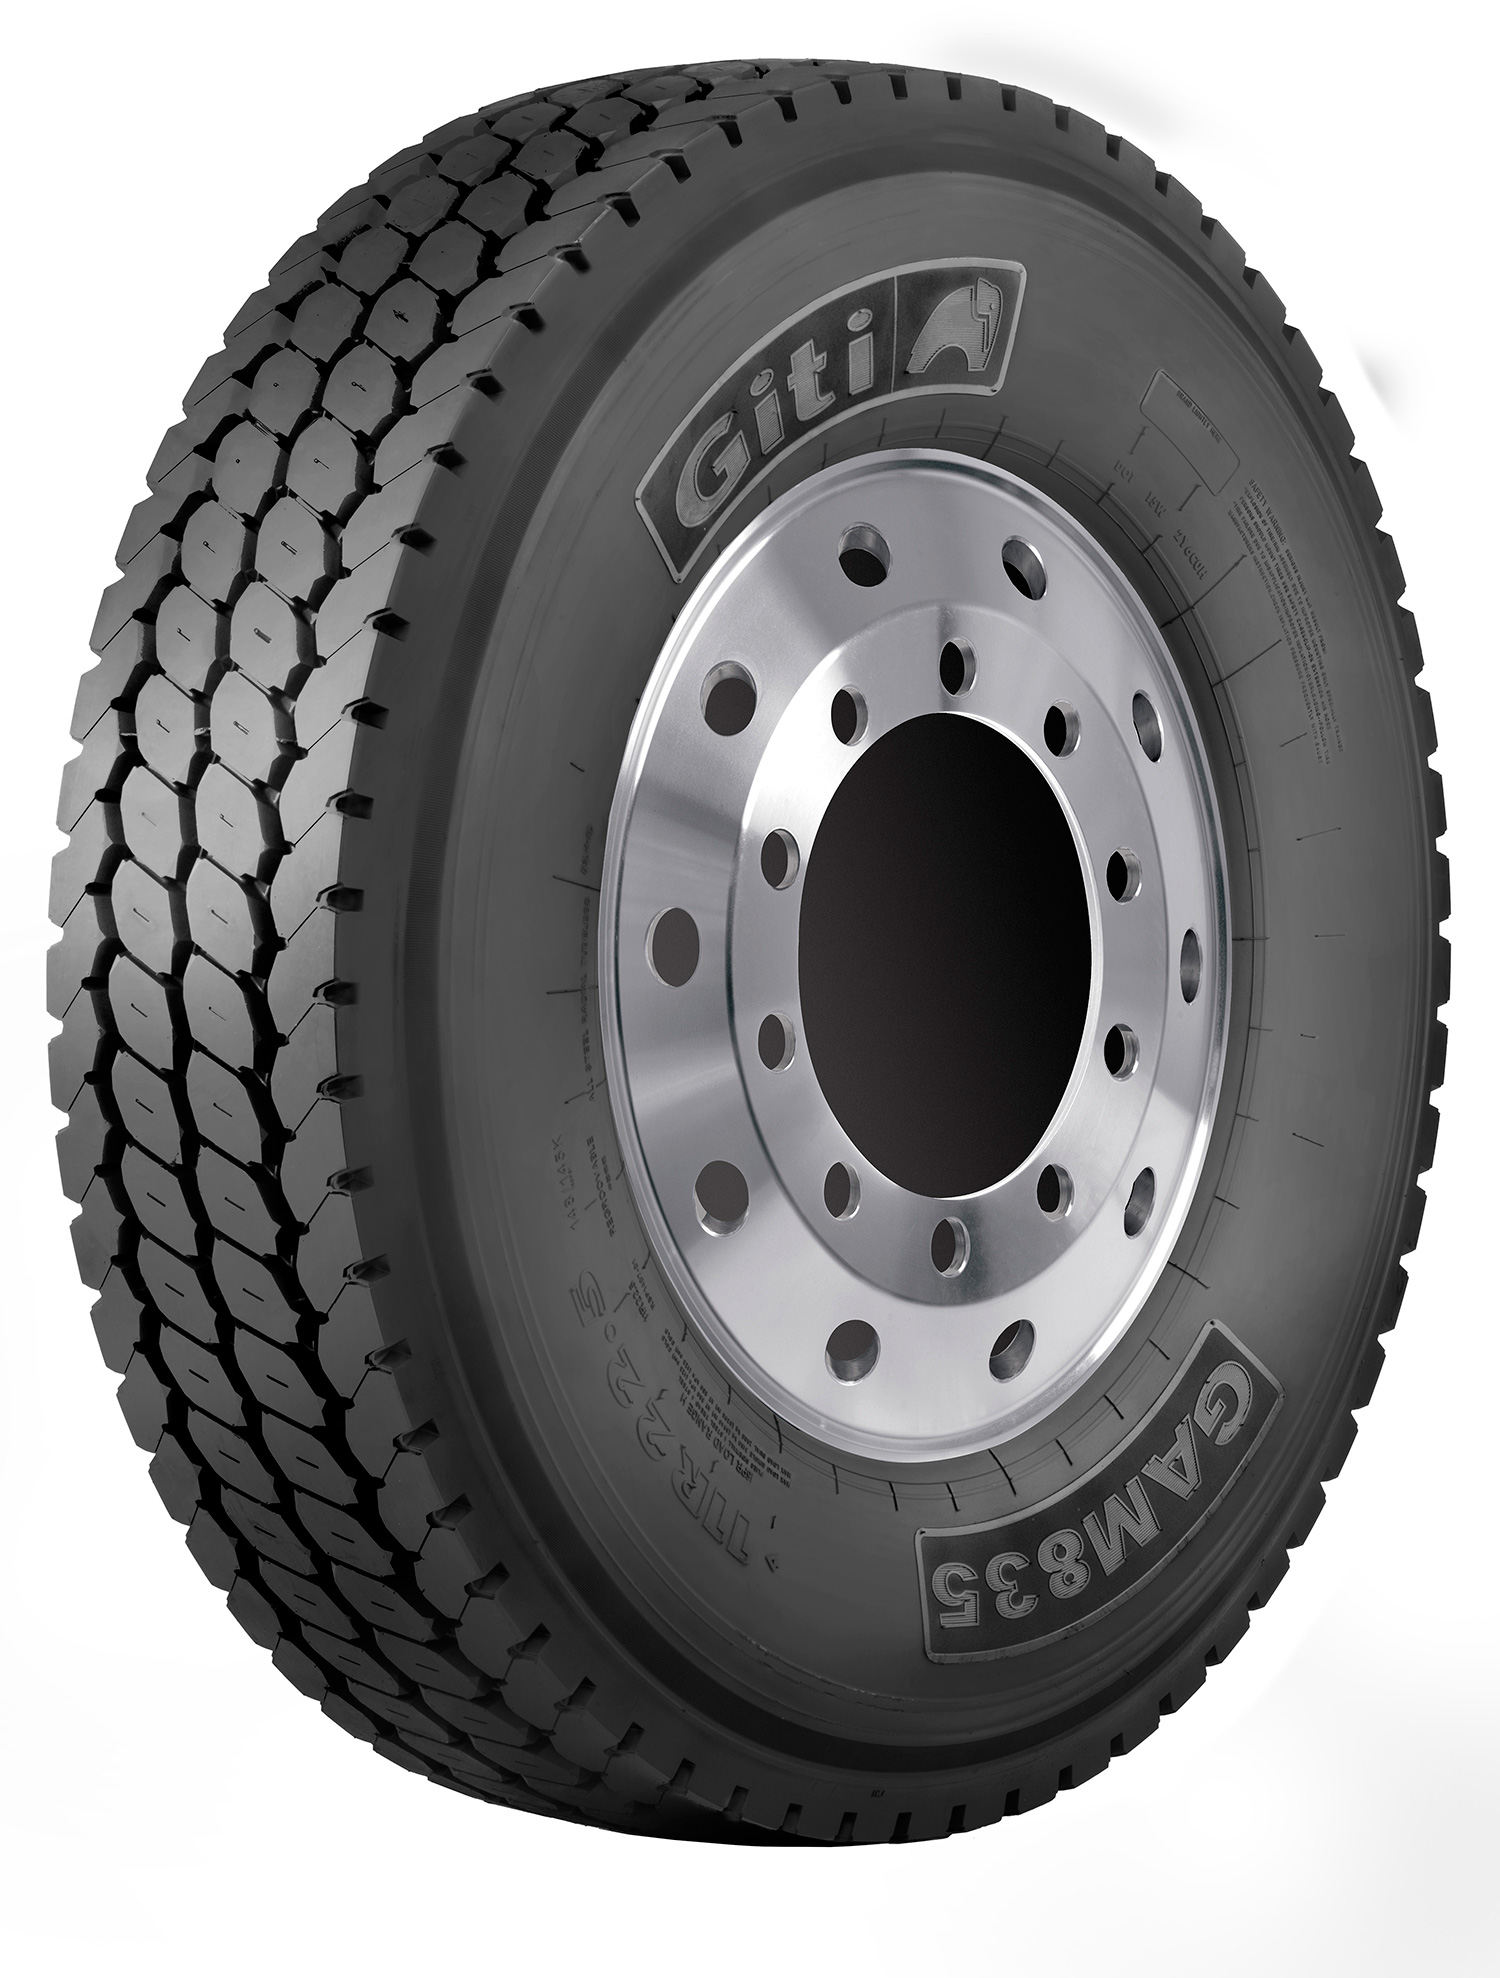 GAM835 All Position Mixed Service Truck Tire